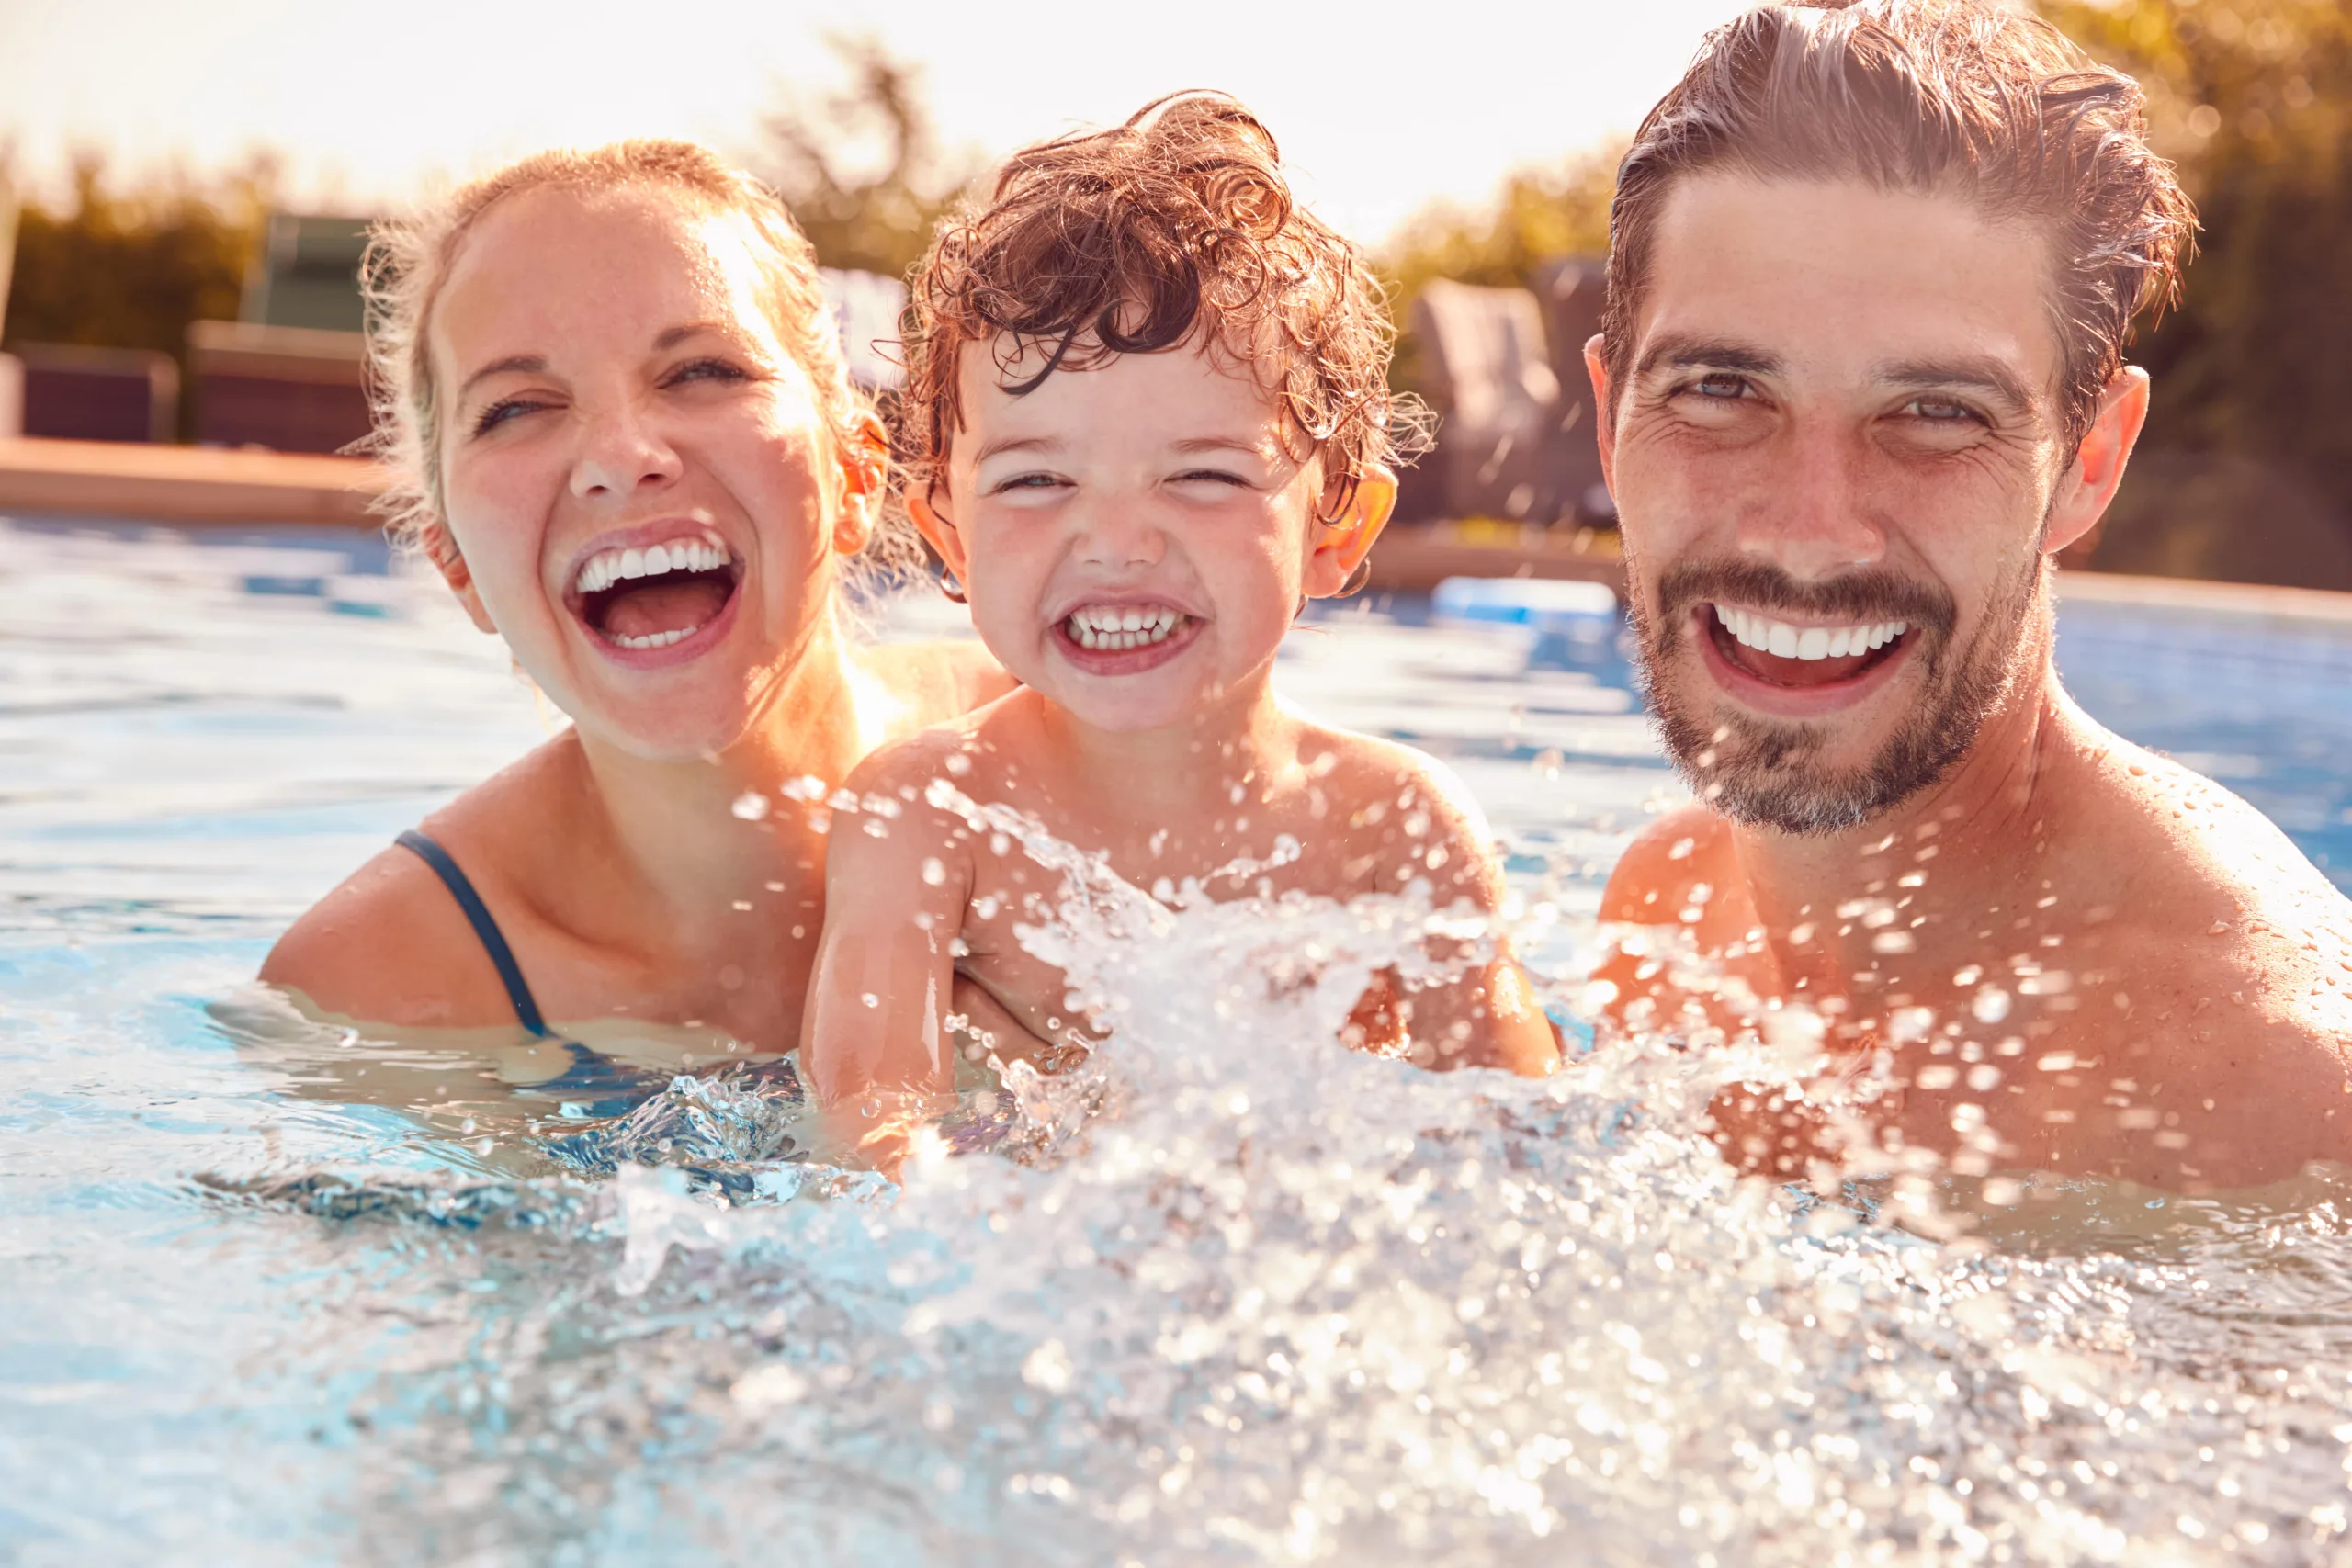 Family splashing and laughing in the pool. Mom on the left with fair skin and hair slicked back laughing holding toddler son smiling and splashing in the water with dad on the right who is fair skinned and has a laughing smile with a short shaggy beard also holding him all looking at the camera in a candid moment in the pool.